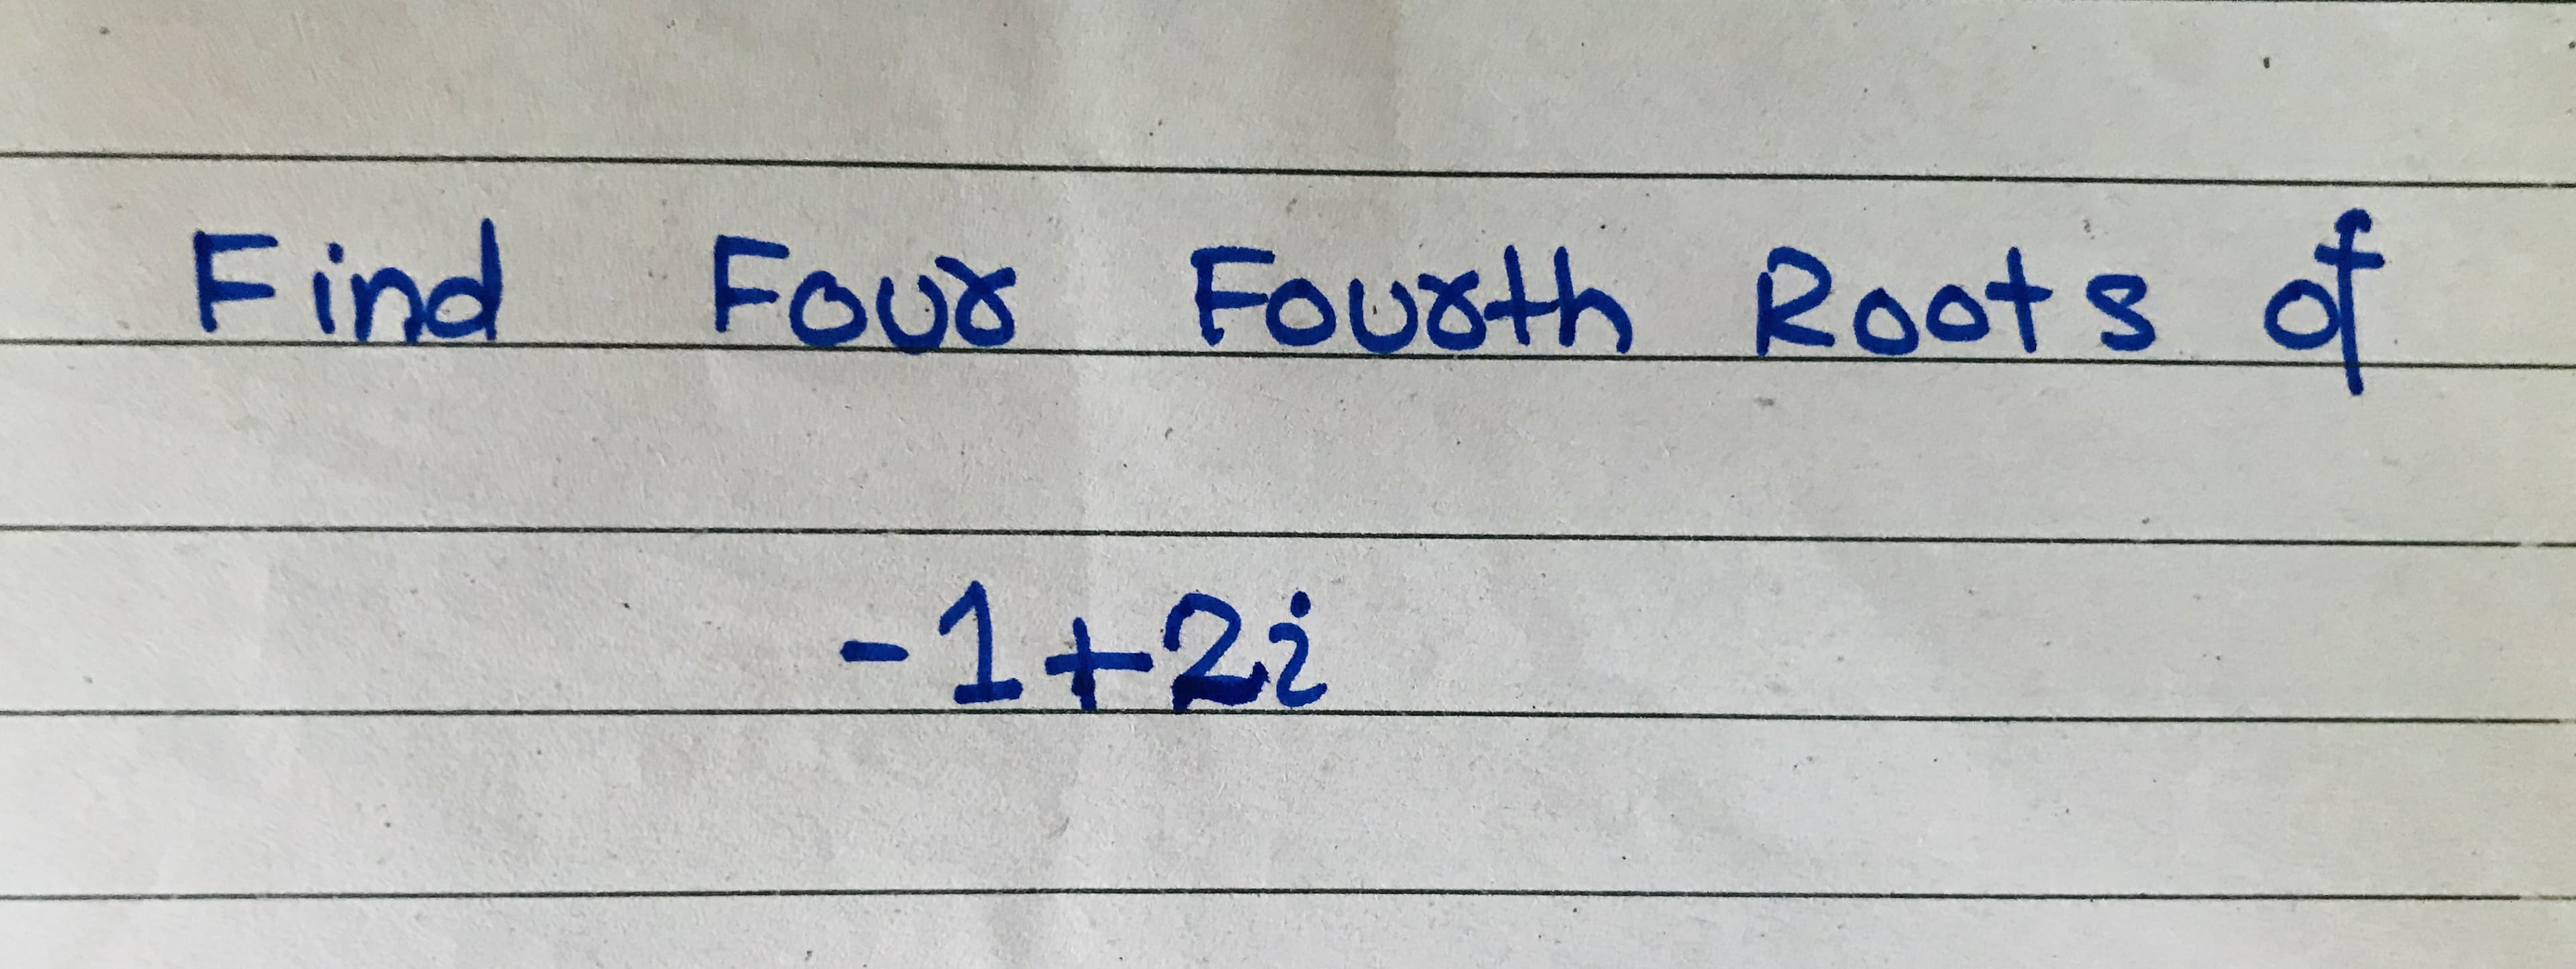 Find
FOur
Fousth Roots of
-1+2i
